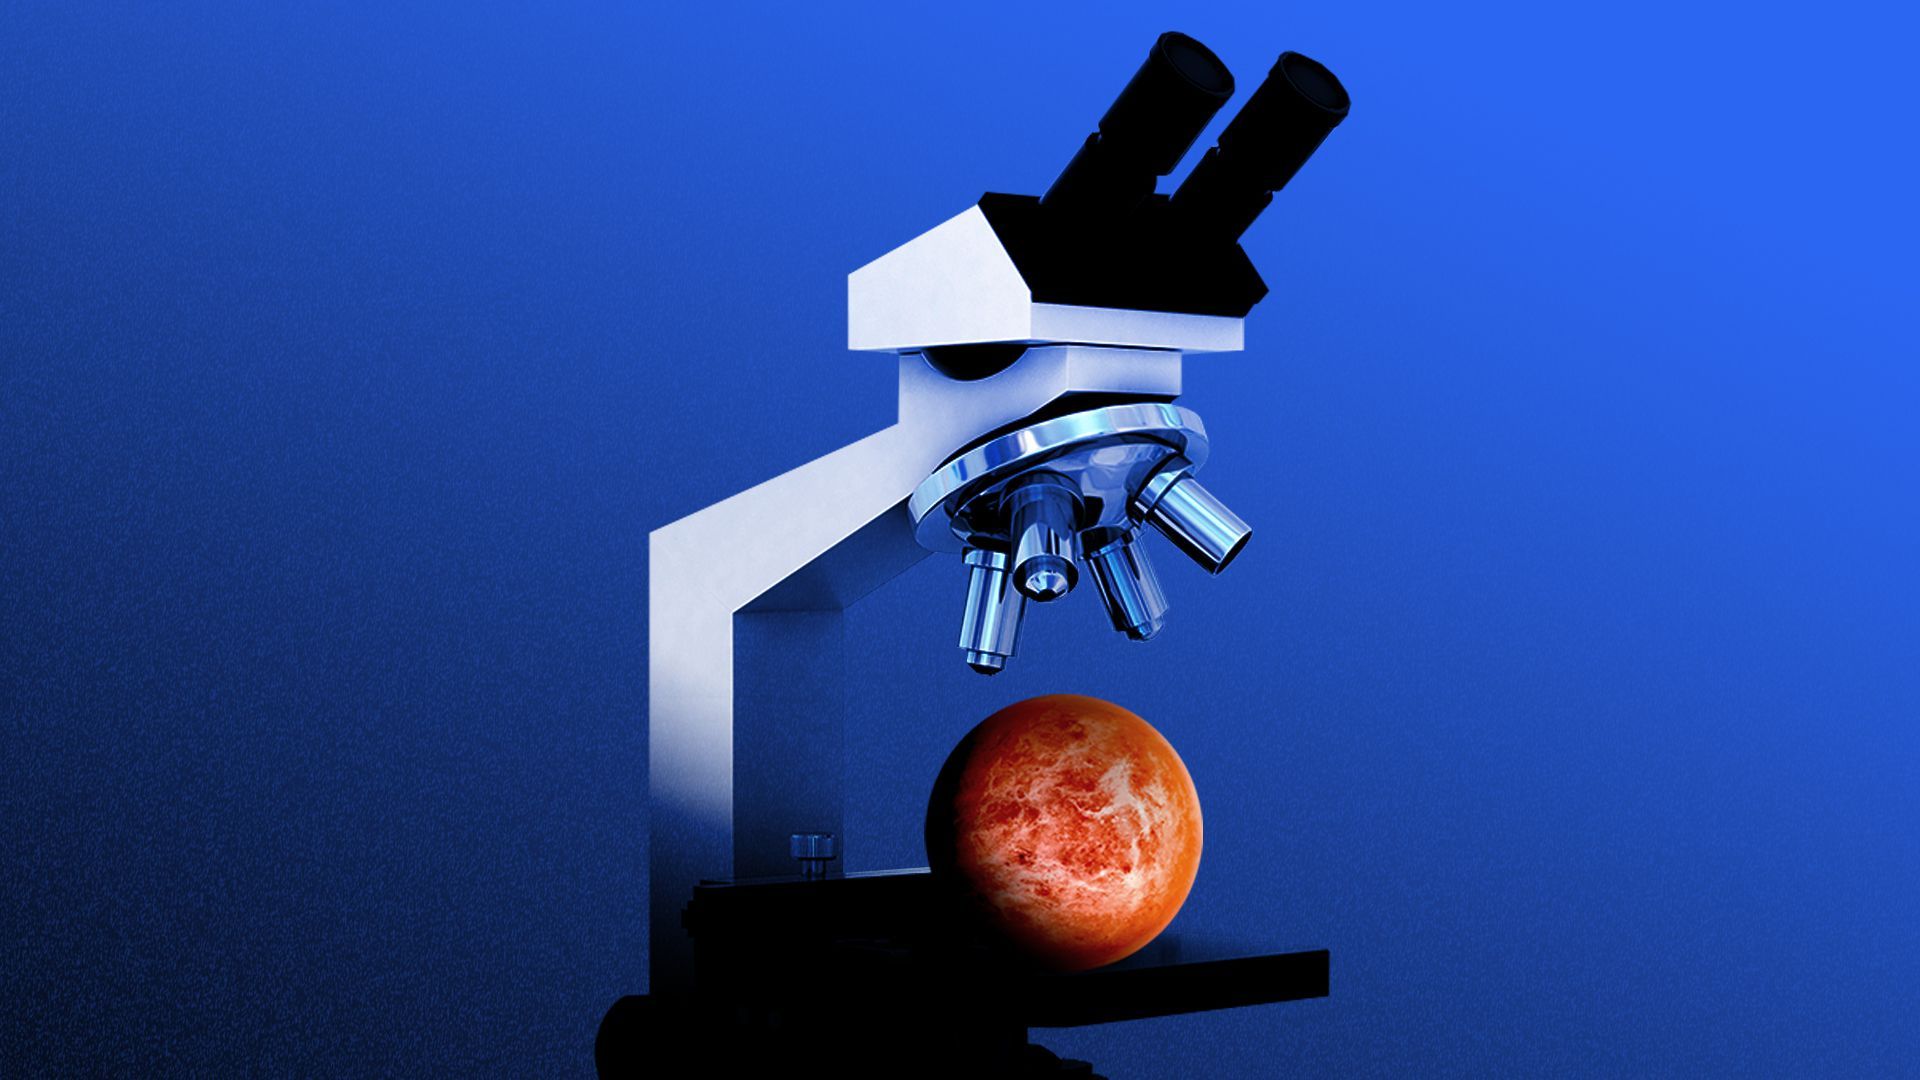 Illustration of the planet Venus being examined under a microscope